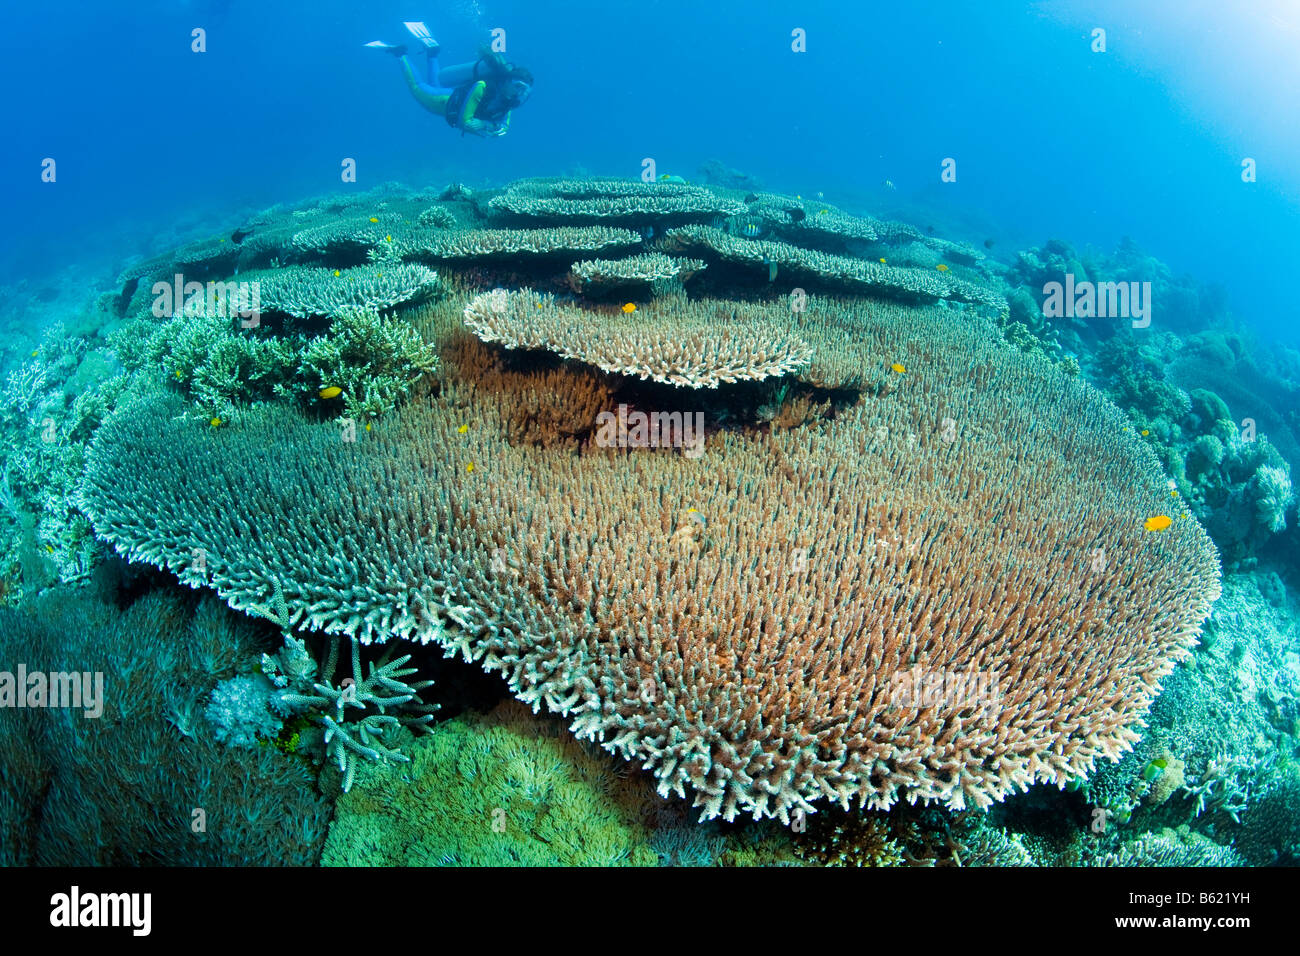 Diver swimming in a coral reef above Acropora hyacinthus (Acropora hyacinthus), coral, Indonesia, South East Asia Stock Photo